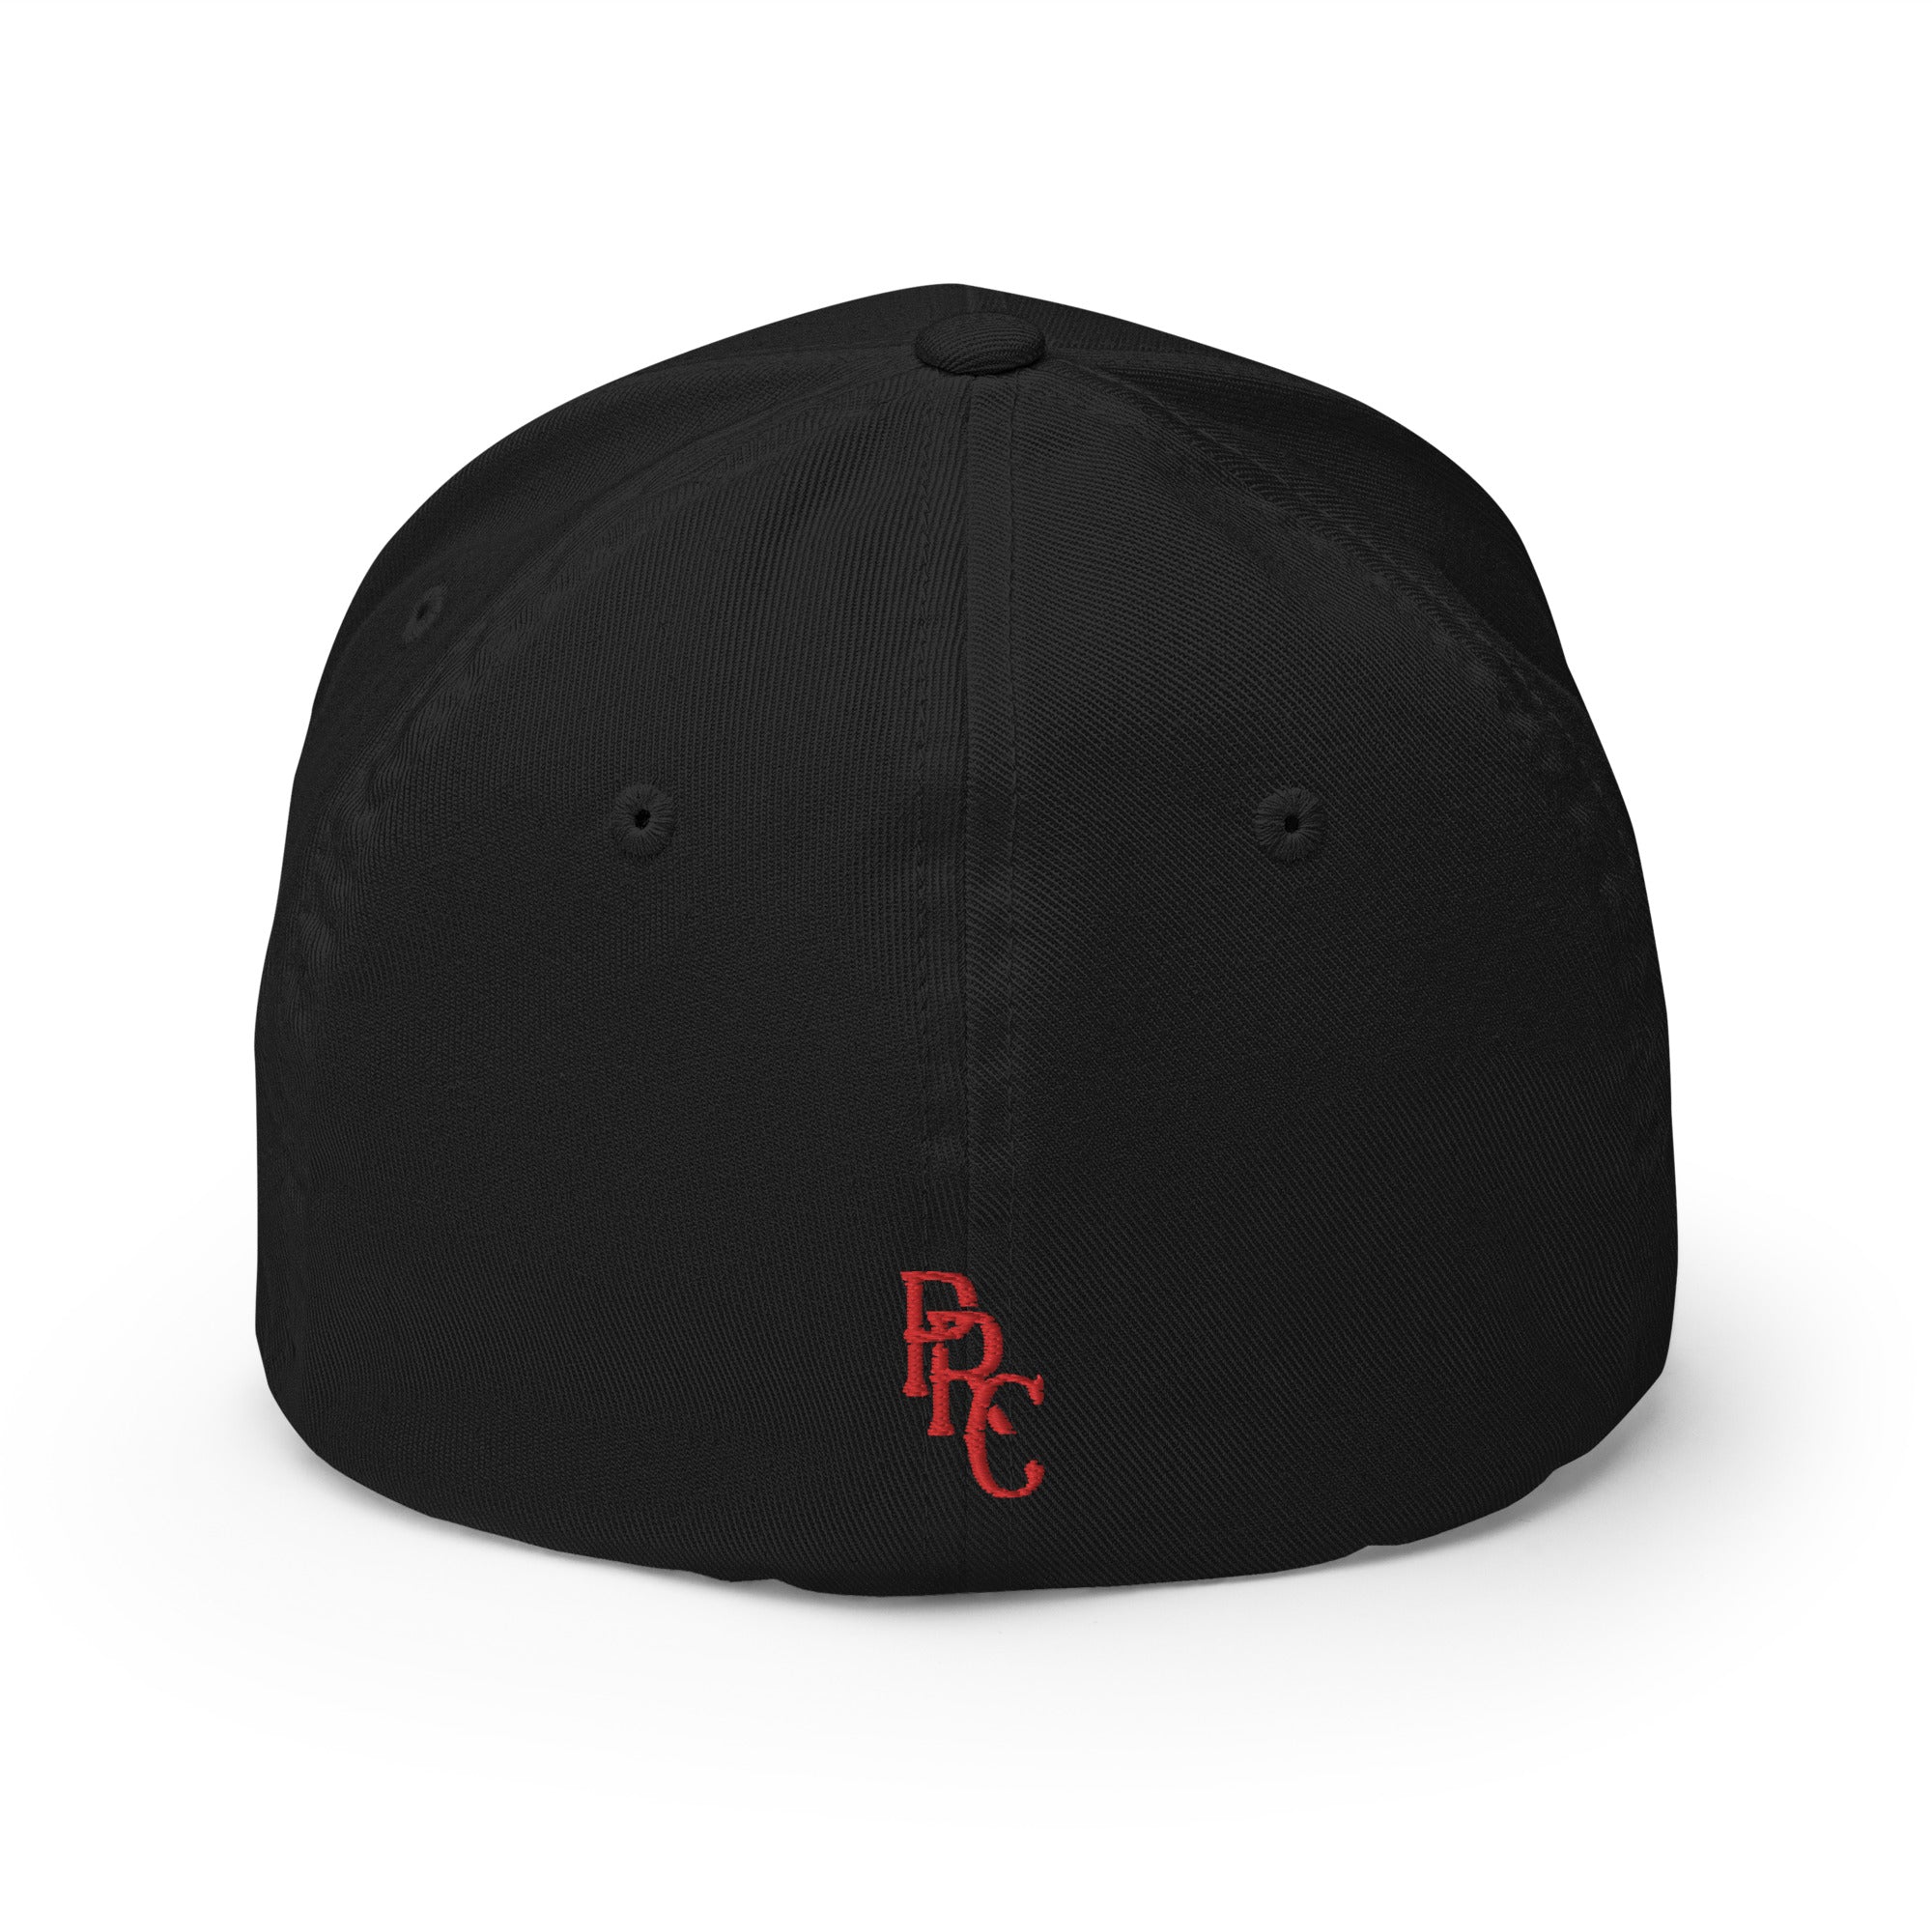 Rugby Imports Portland Pigs Structured Flexfit Cap